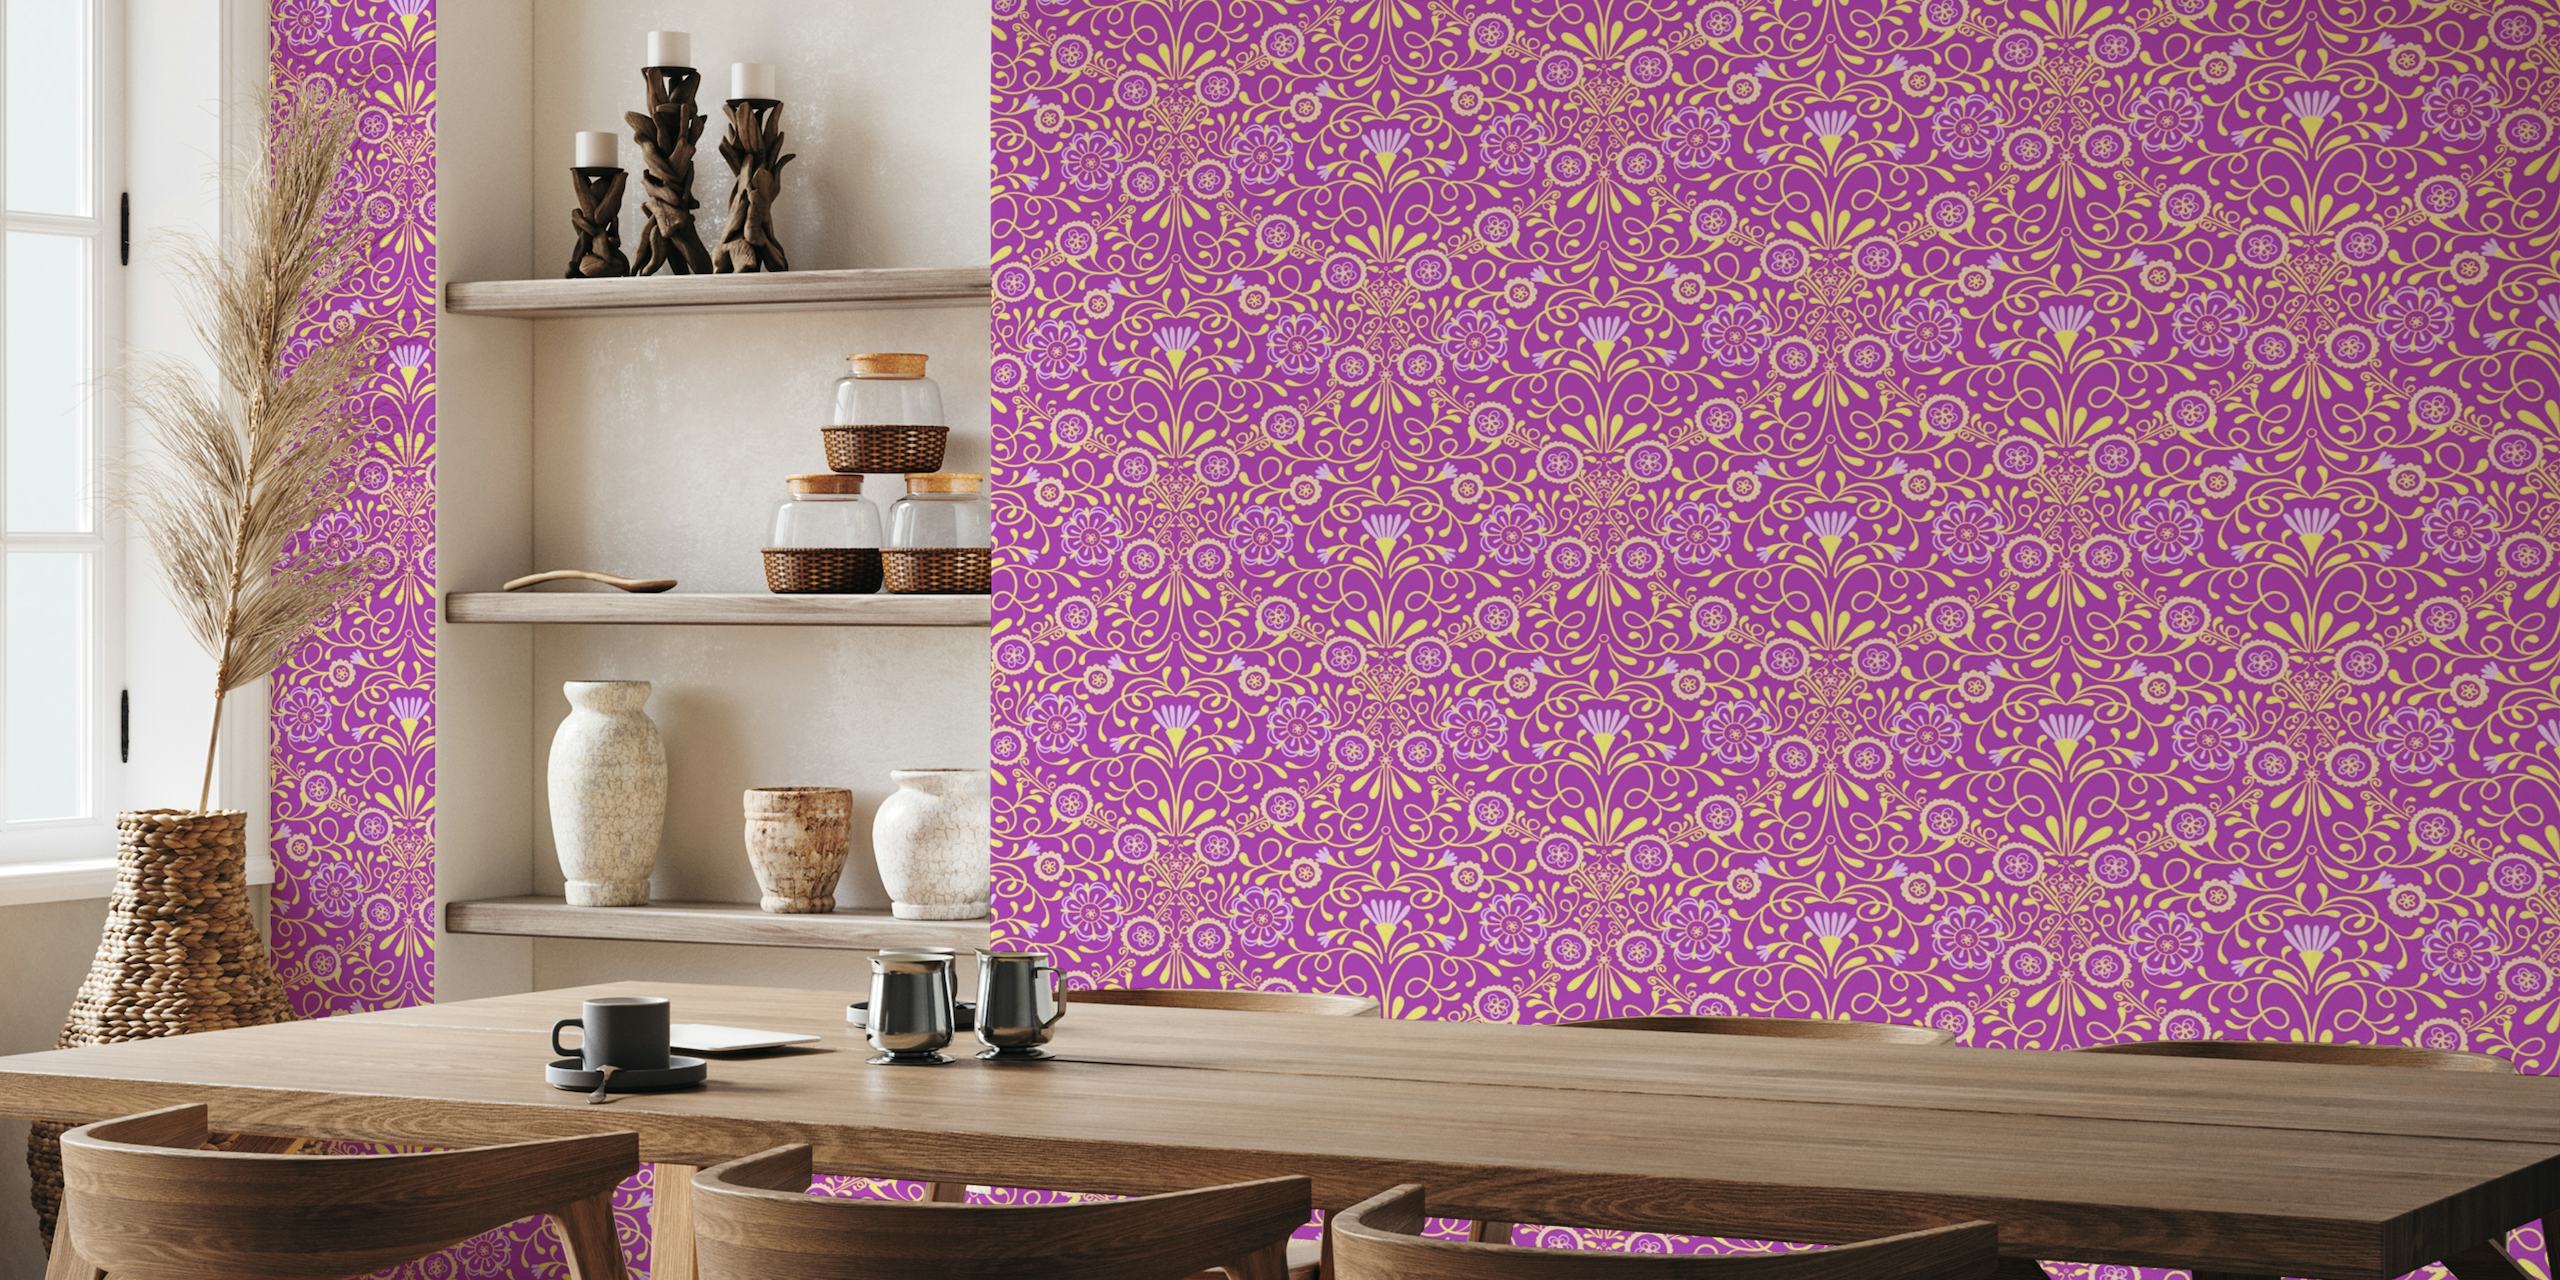 Tuscan Tile in Magenta, Yellow, and Purple wallpaper